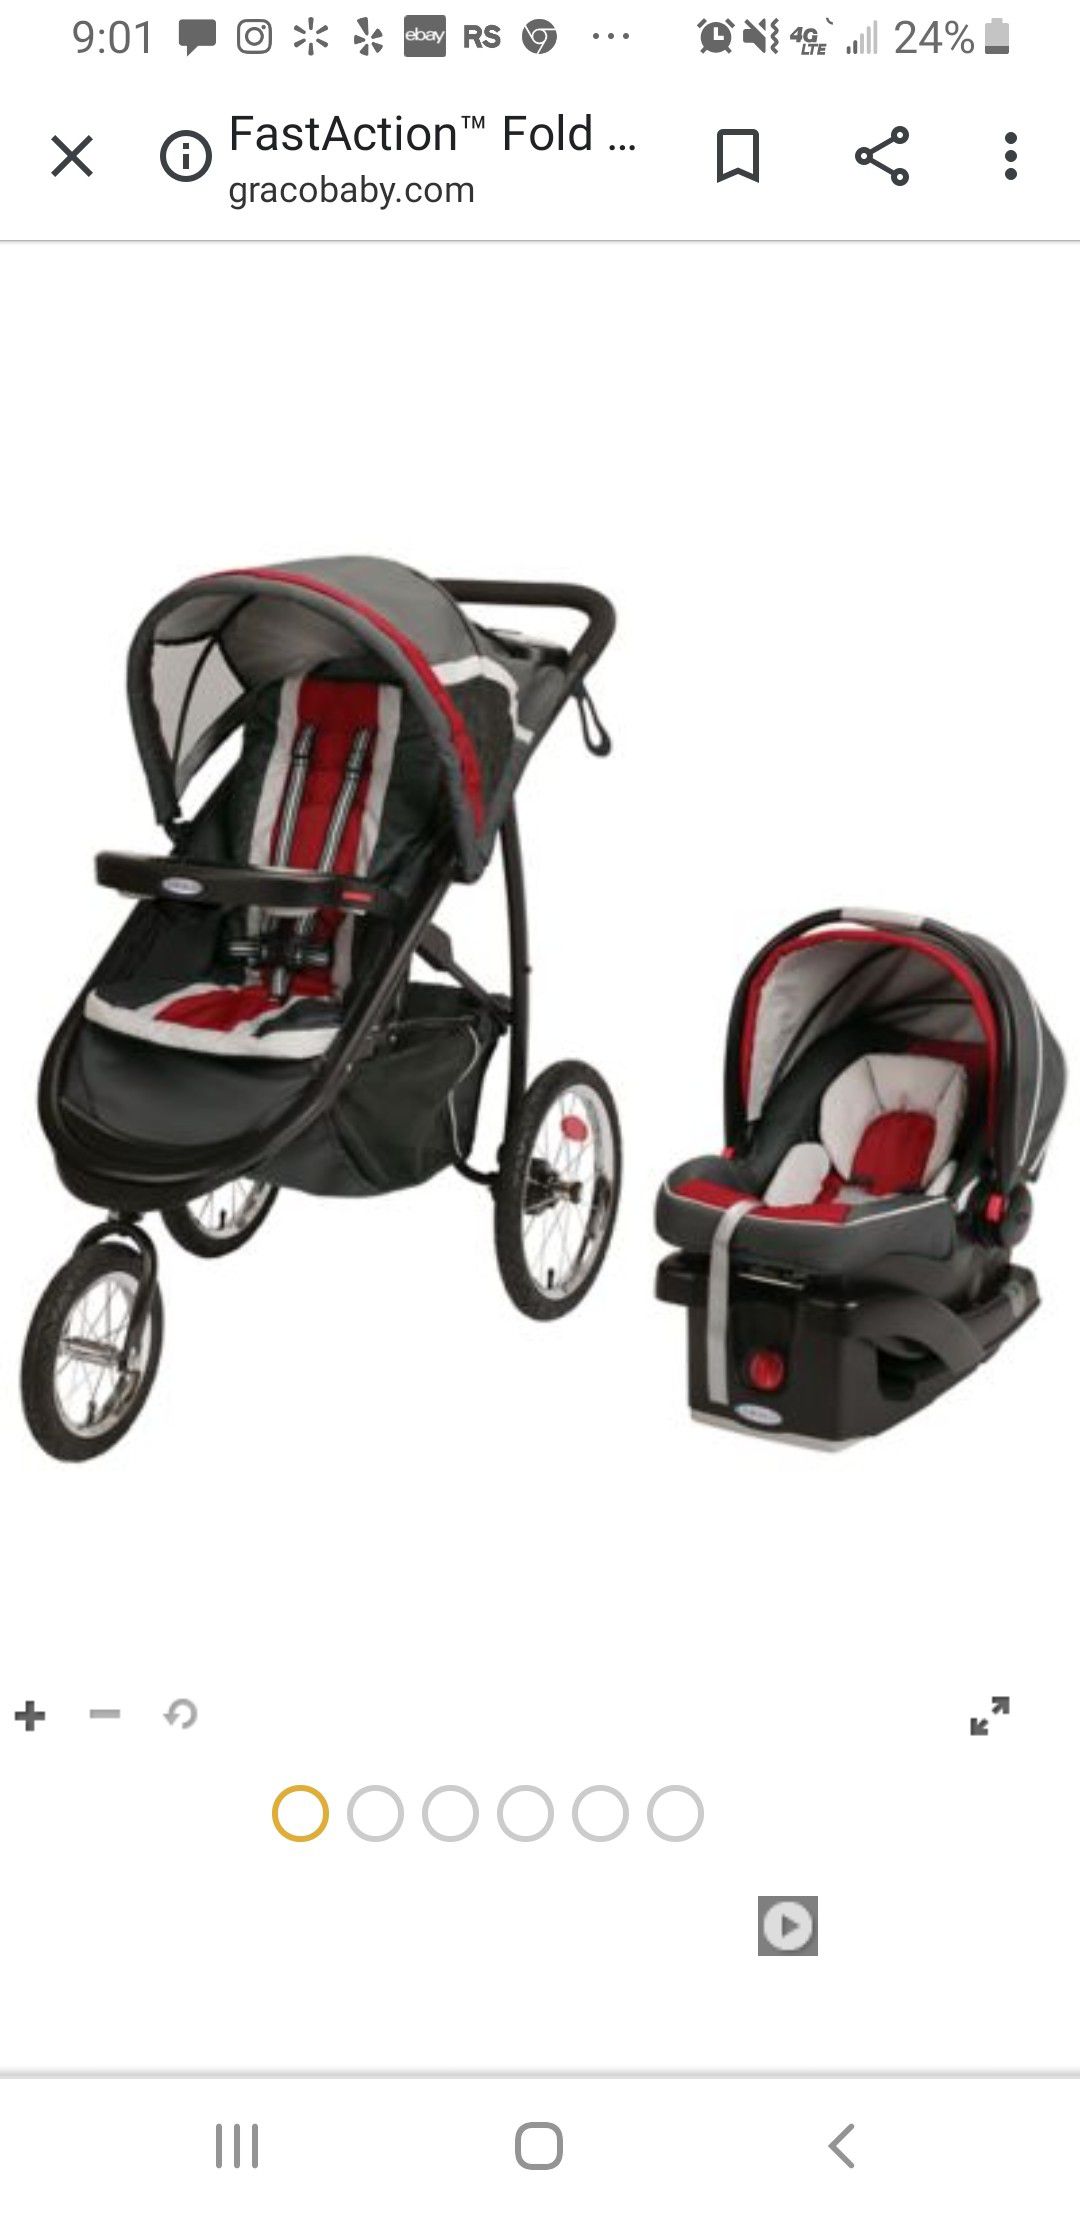 Graco FastAction Fold Jogger Click Connect Travel System Stroller with Car Seat - Chili Red